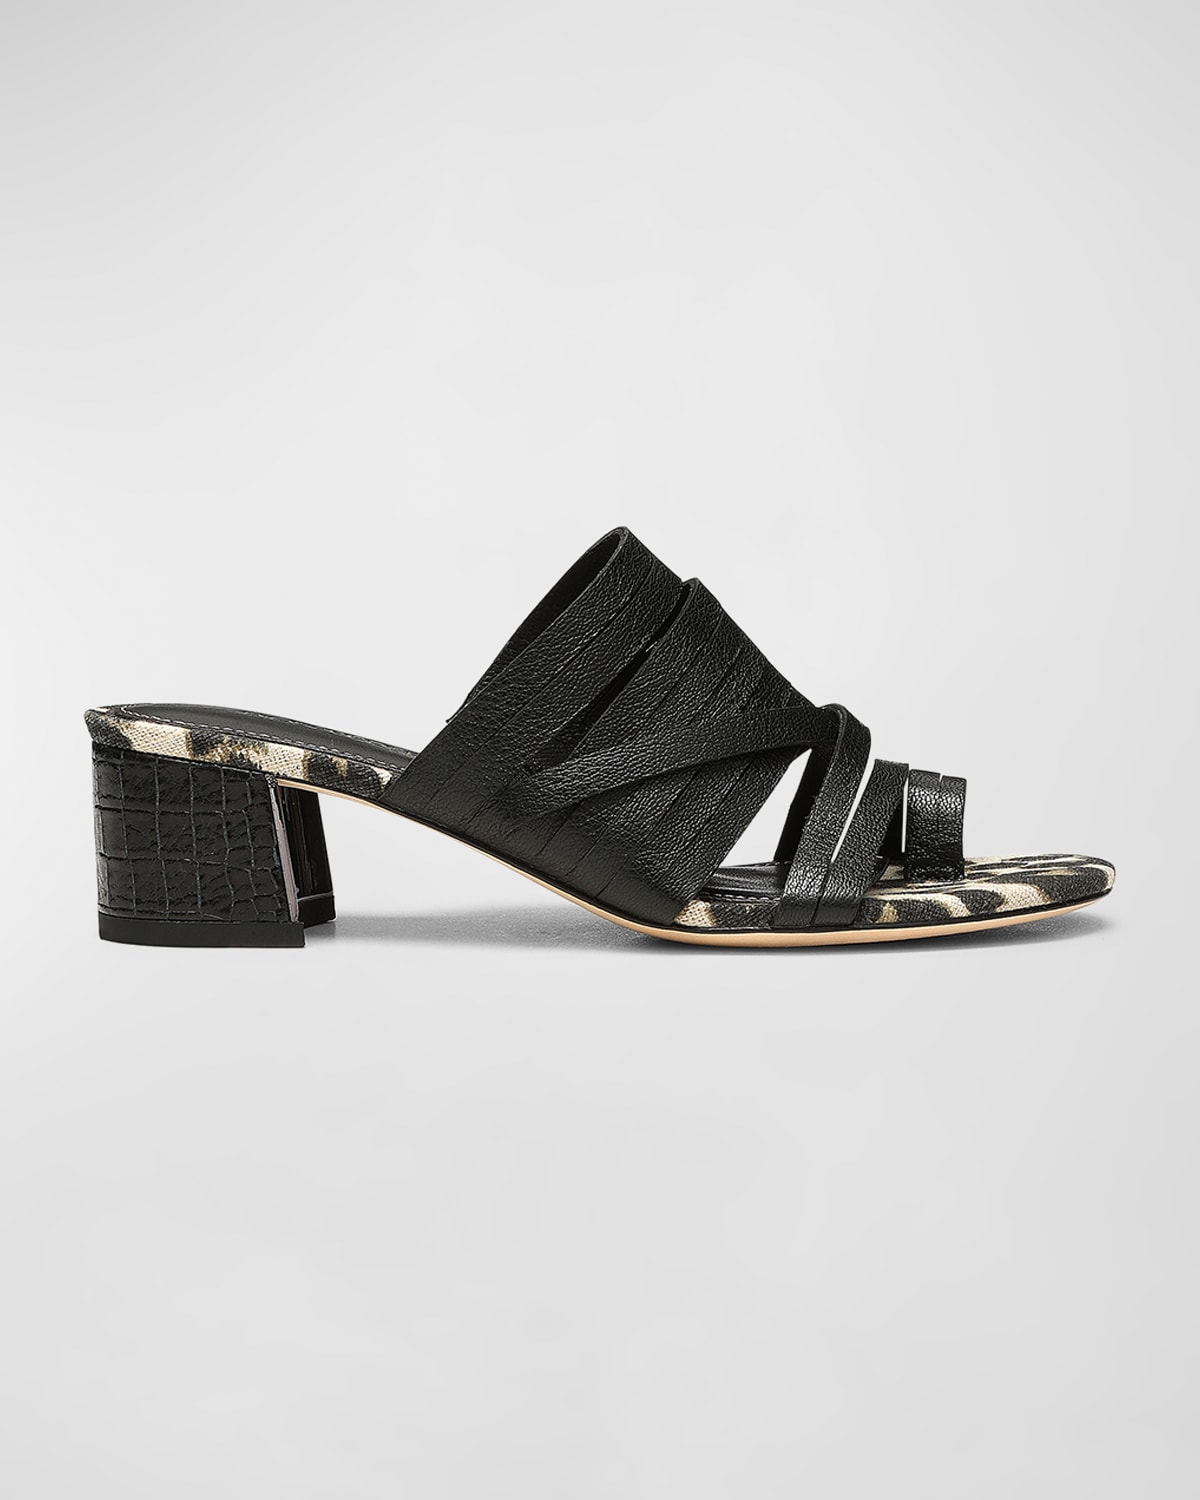 Marlow Strappy Toe-Ring Mule Sandals